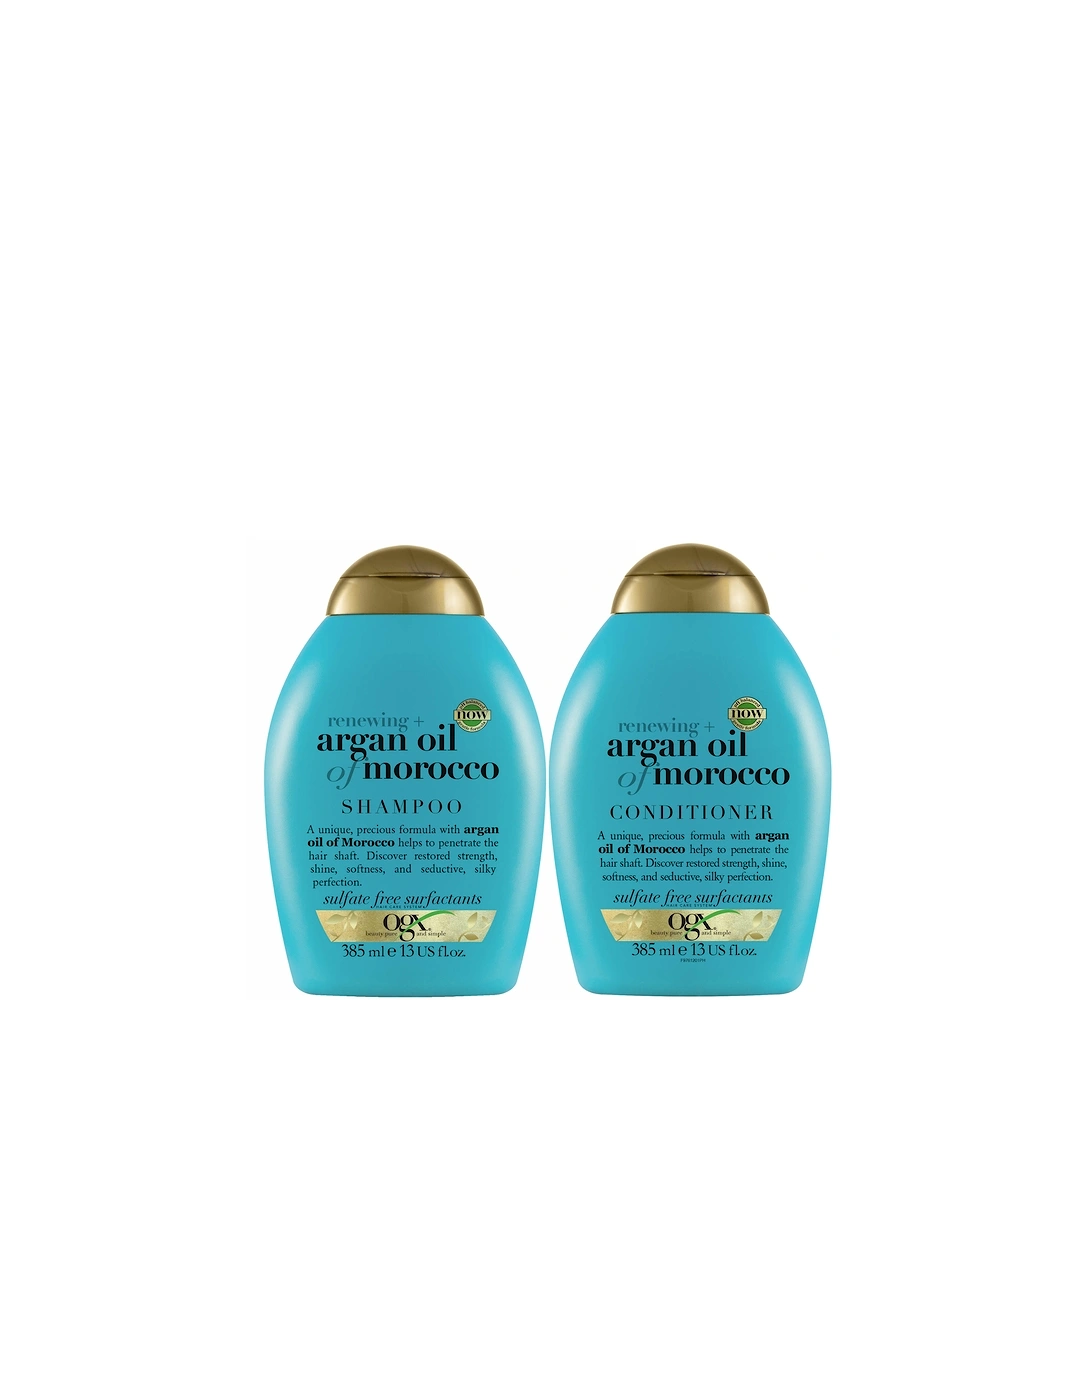 Renewing+ Argan Oil of Morocco Shampoo and Conditioner Bundle for Shiny Hair, 2 of 1